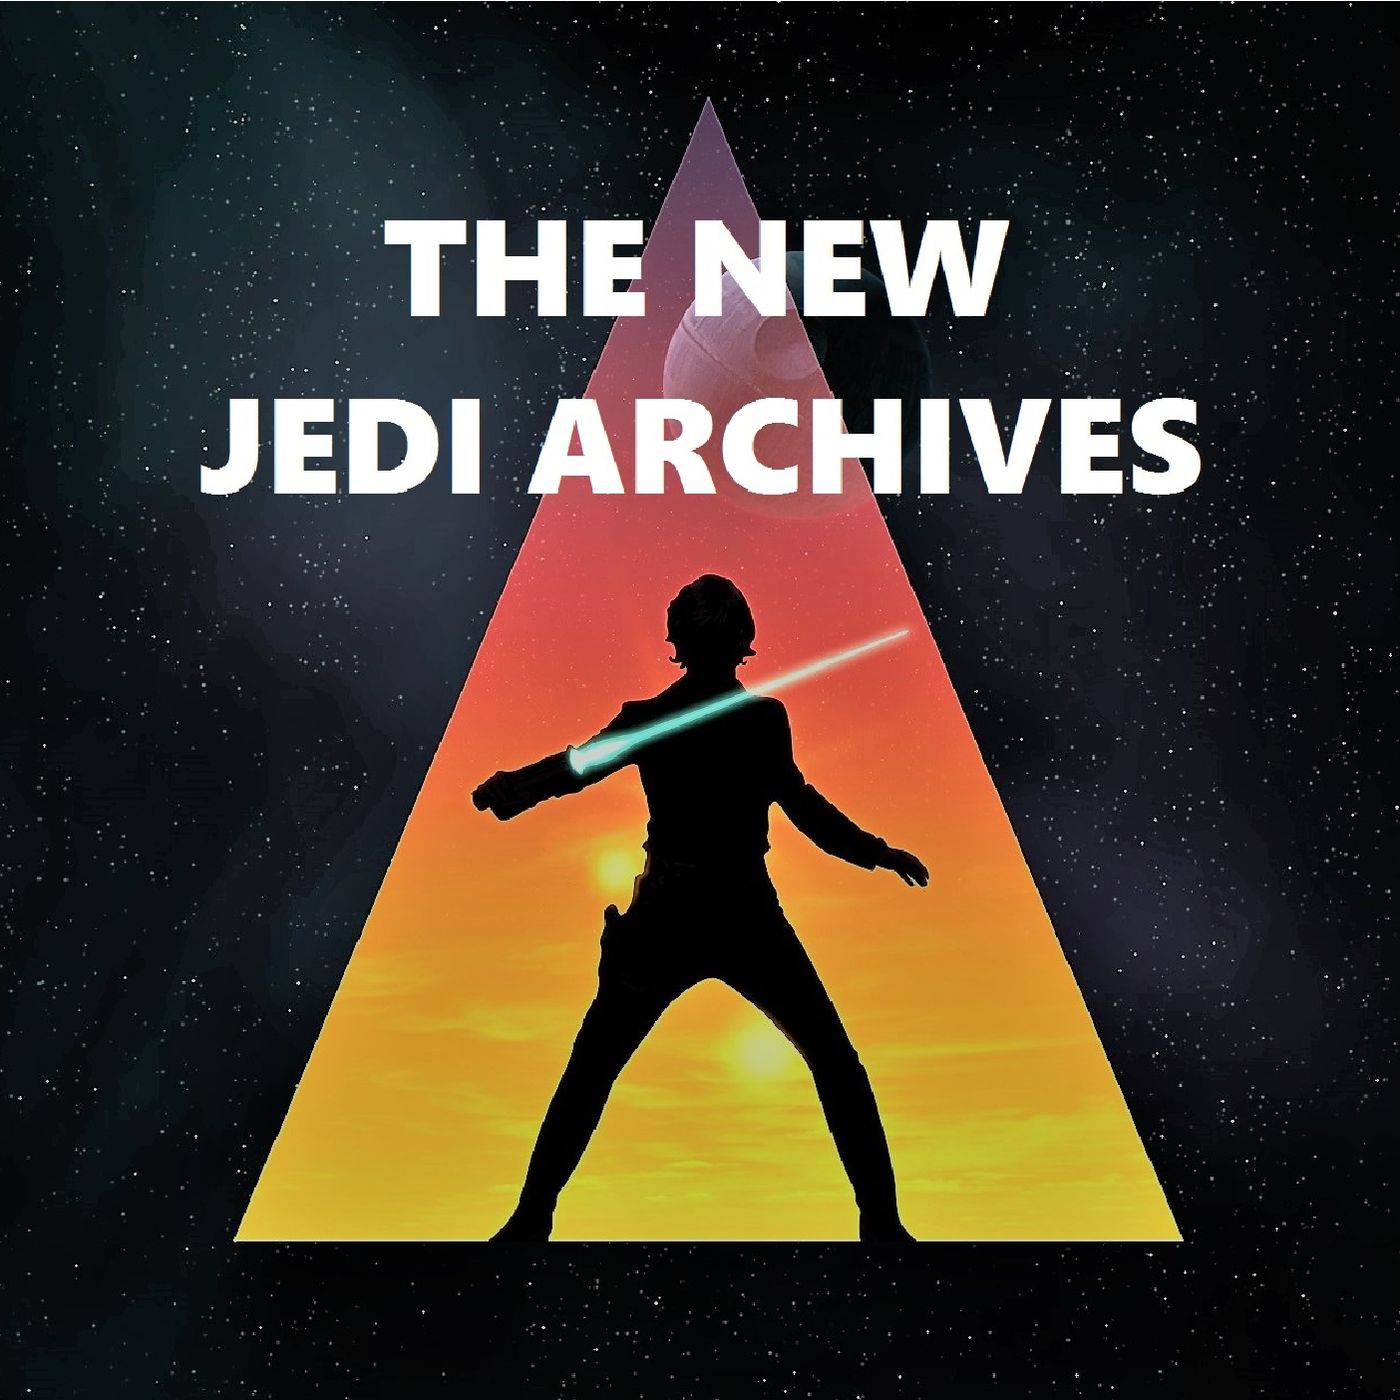 The New Jedi Archives